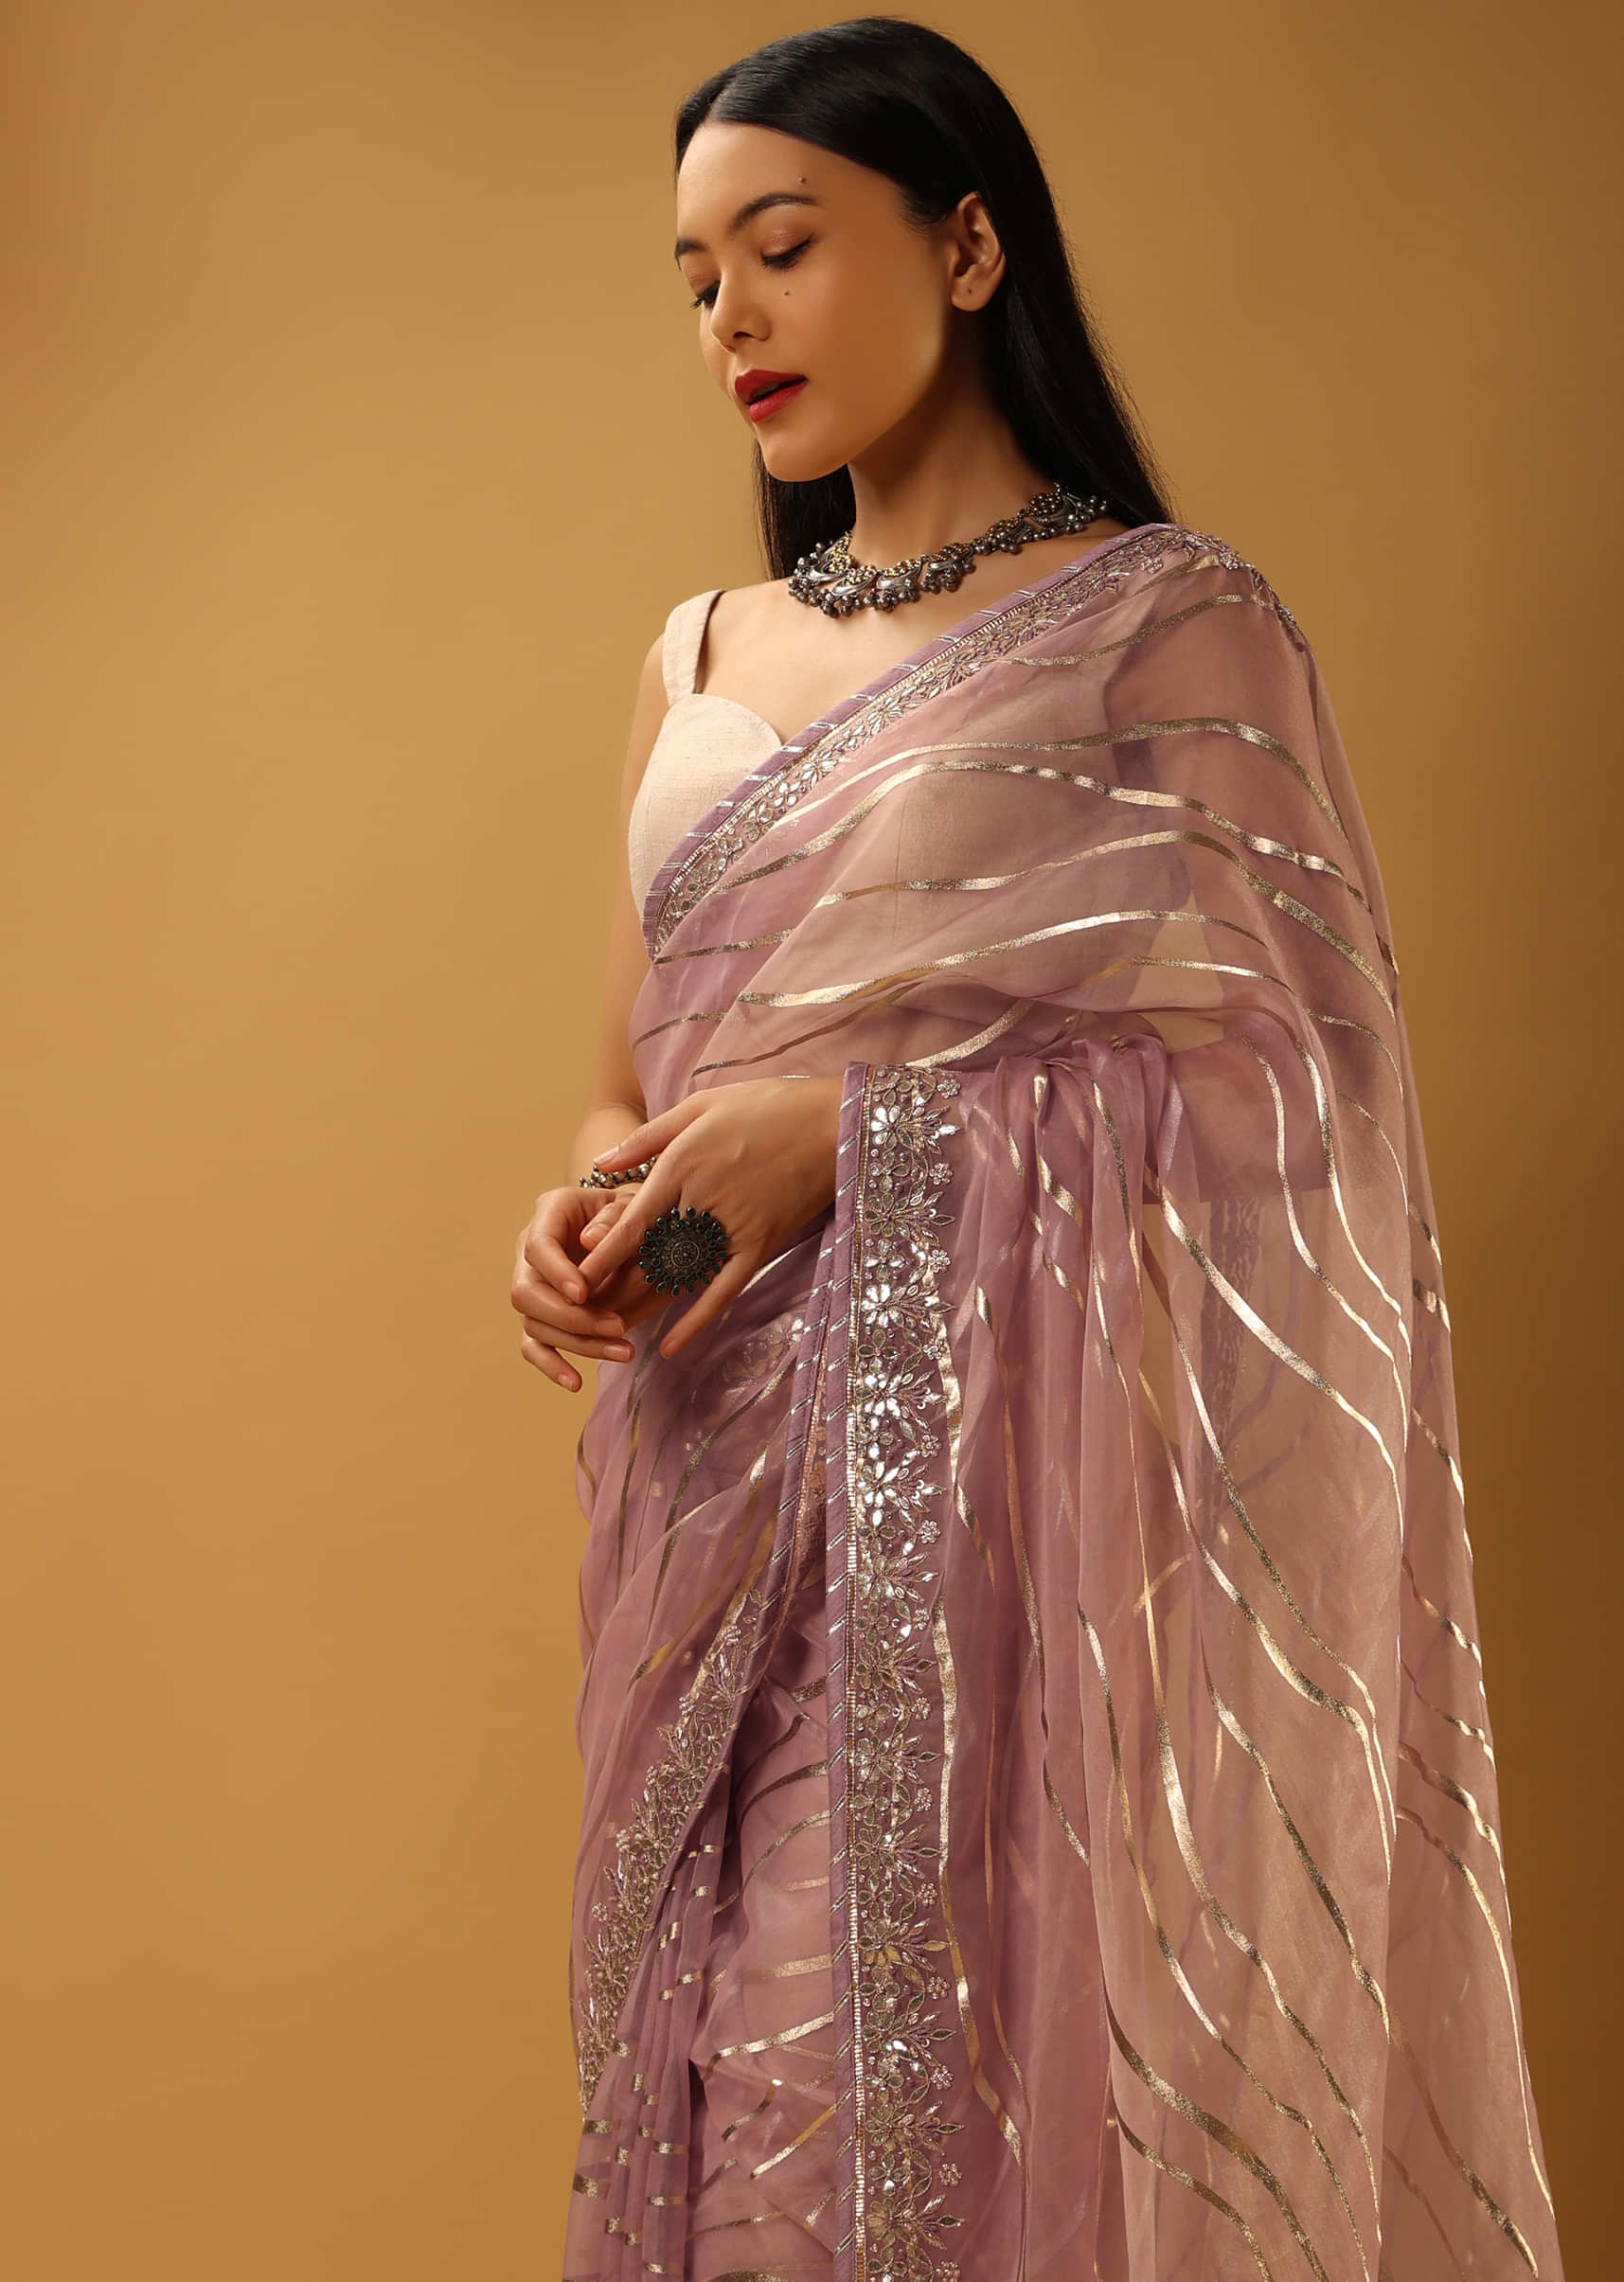 Dusty Lilac Saree In Organza With Foil Printed Wave Design And Gotta Border Online - Kalki Fashion